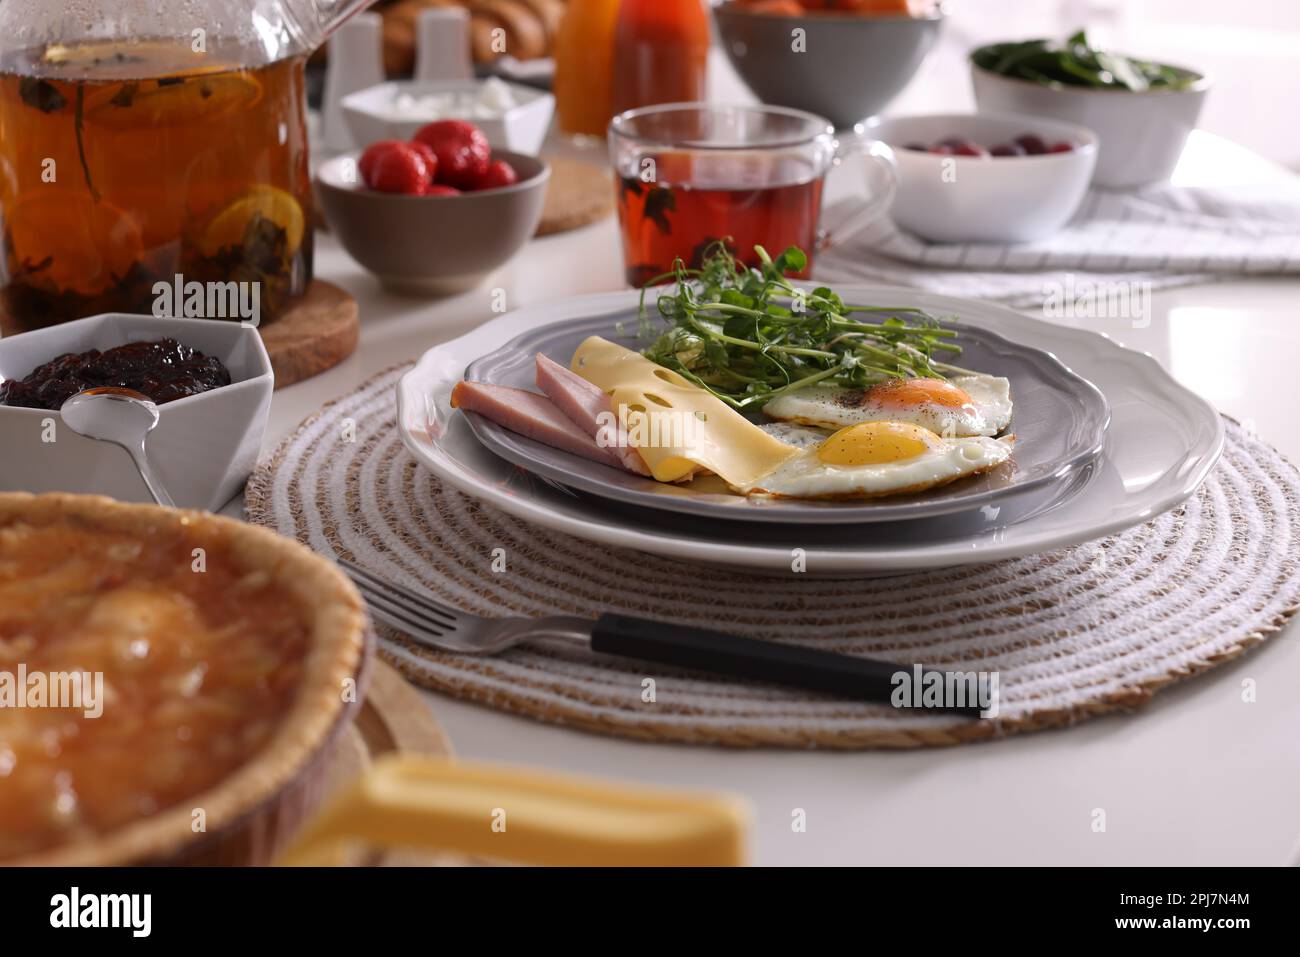 https://c8.alamy.com/comp/2PJ7N4M/fried-eggs-with-sausage-and-cheese-served-on-buffet-table-for-brunch-2PJ7N4M.jpg